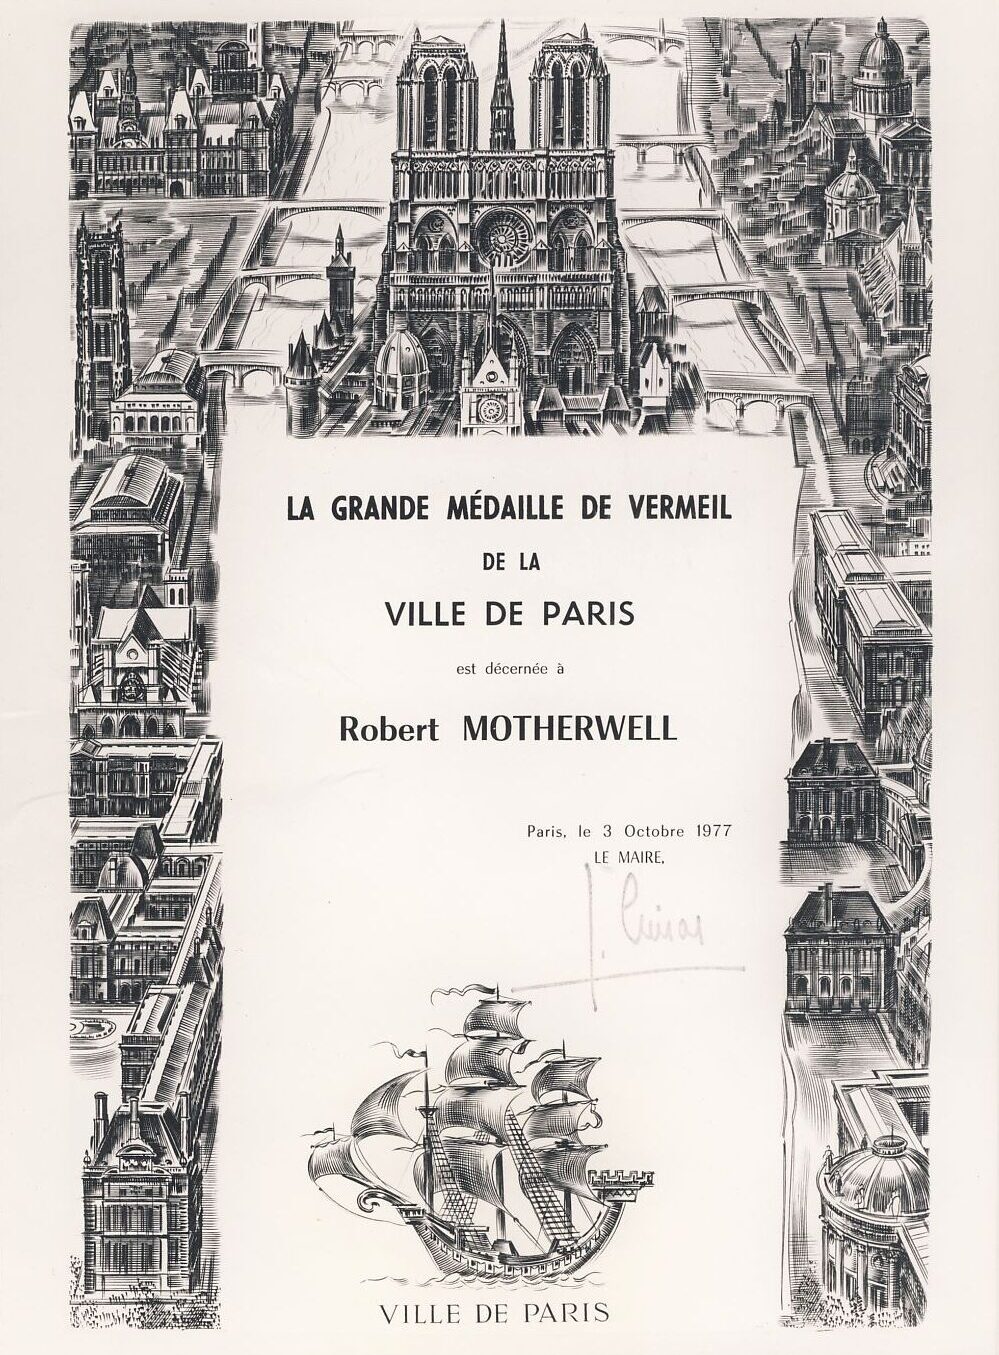 Certificate of La Grande Médaille de Vermeil received by Motherwell from the city of Paris, 1978